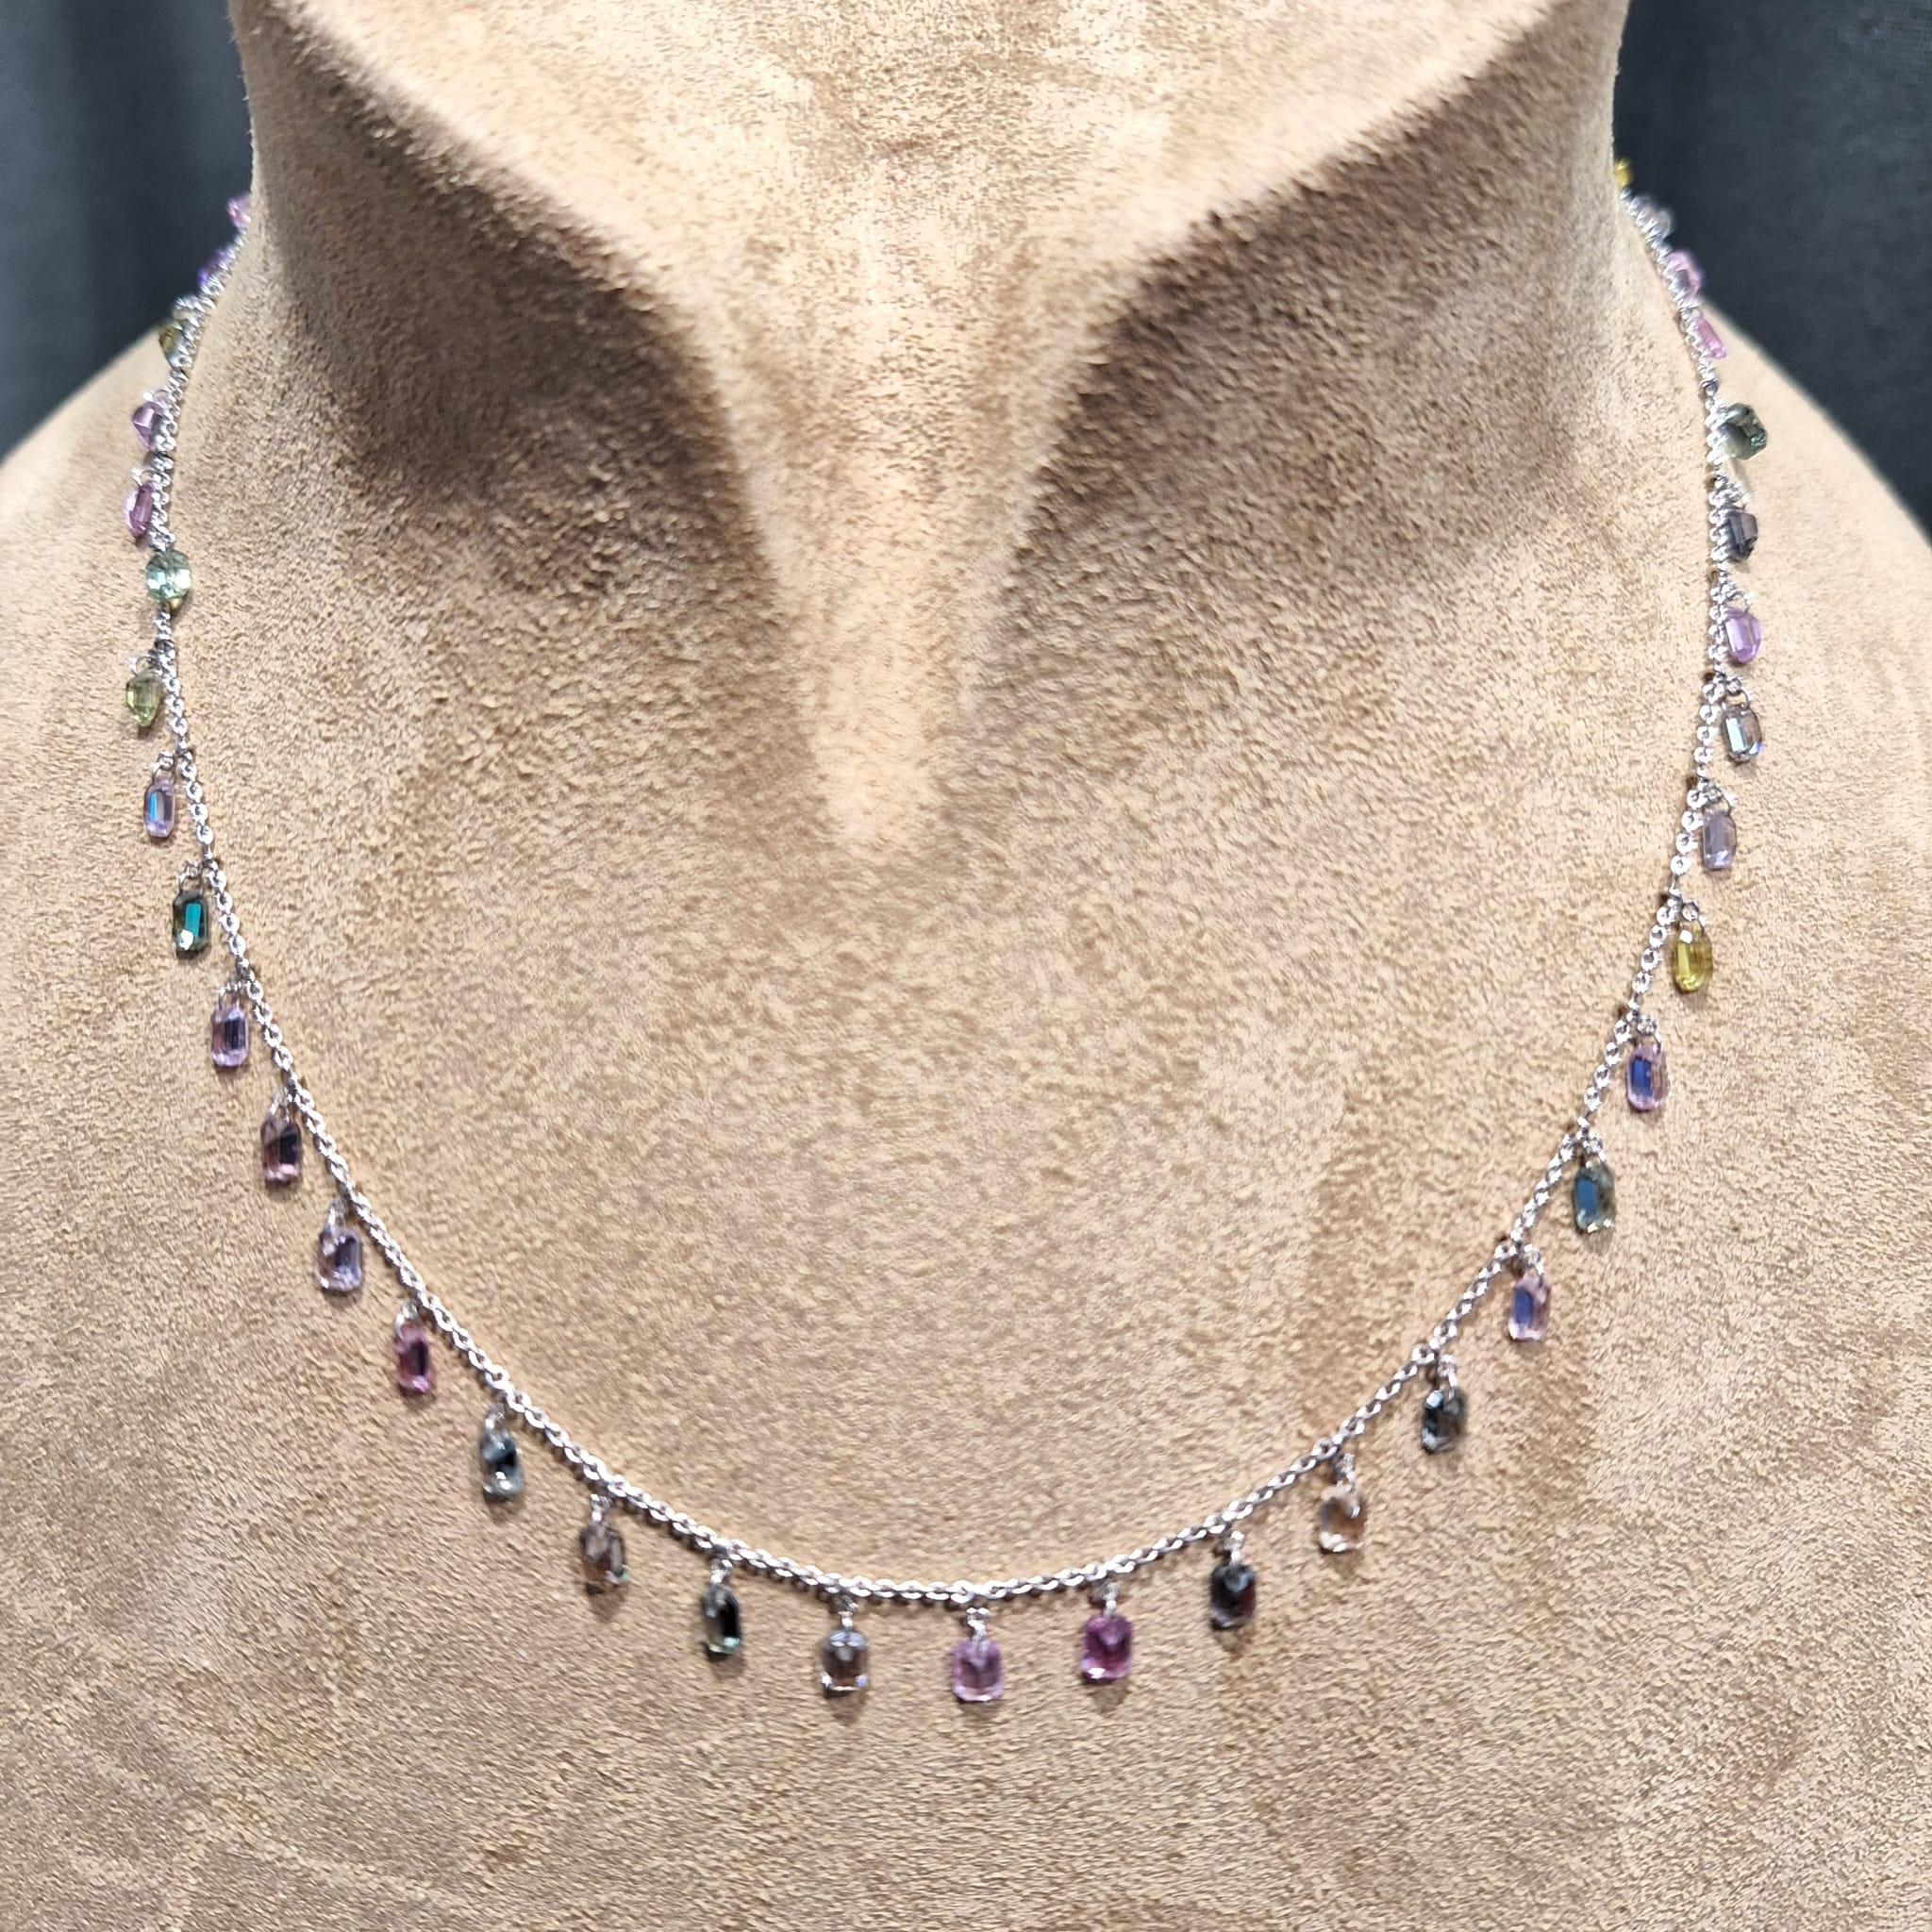 18K White Gold Necklace with Multi-Color Sapphire

Sapphires symbolize wisdom, loyalty, insight, and faithfulness, also thought to promote a strong mind and give motivation.

The necklace setting with multi-color sapphire total weight 9.20ct, made